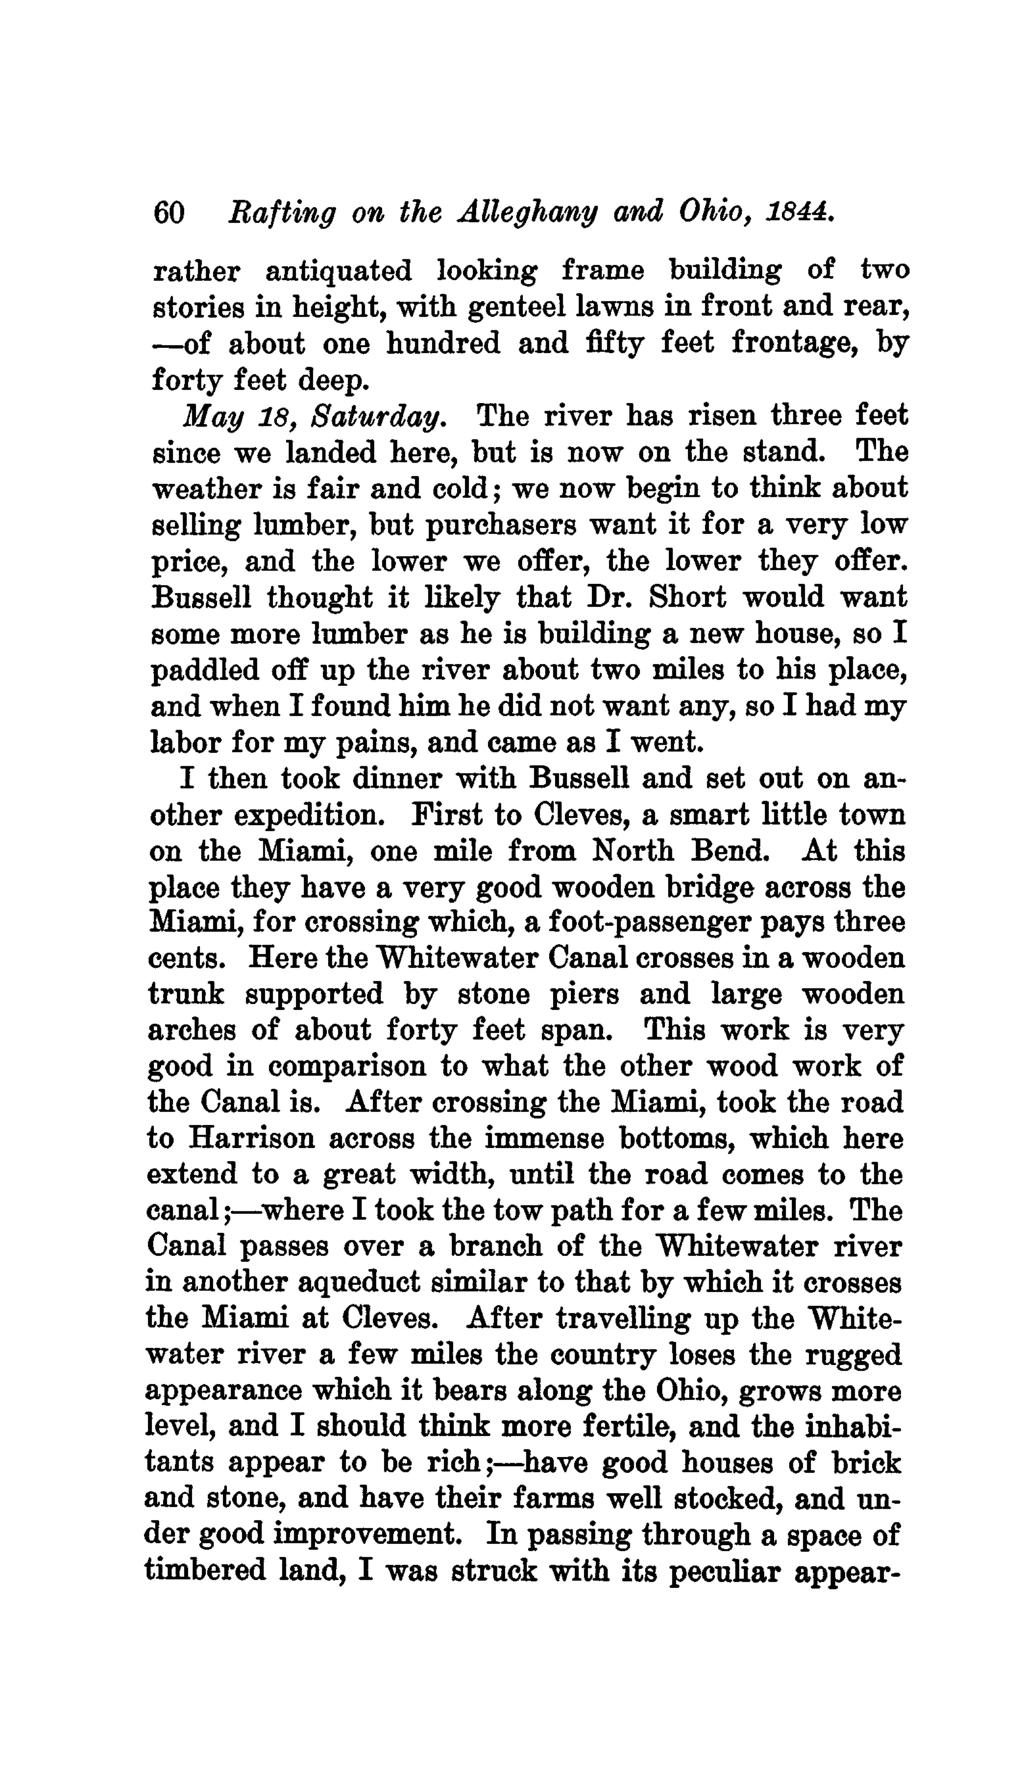 60 Rafting on the Alleghany and Ohio, 1844.